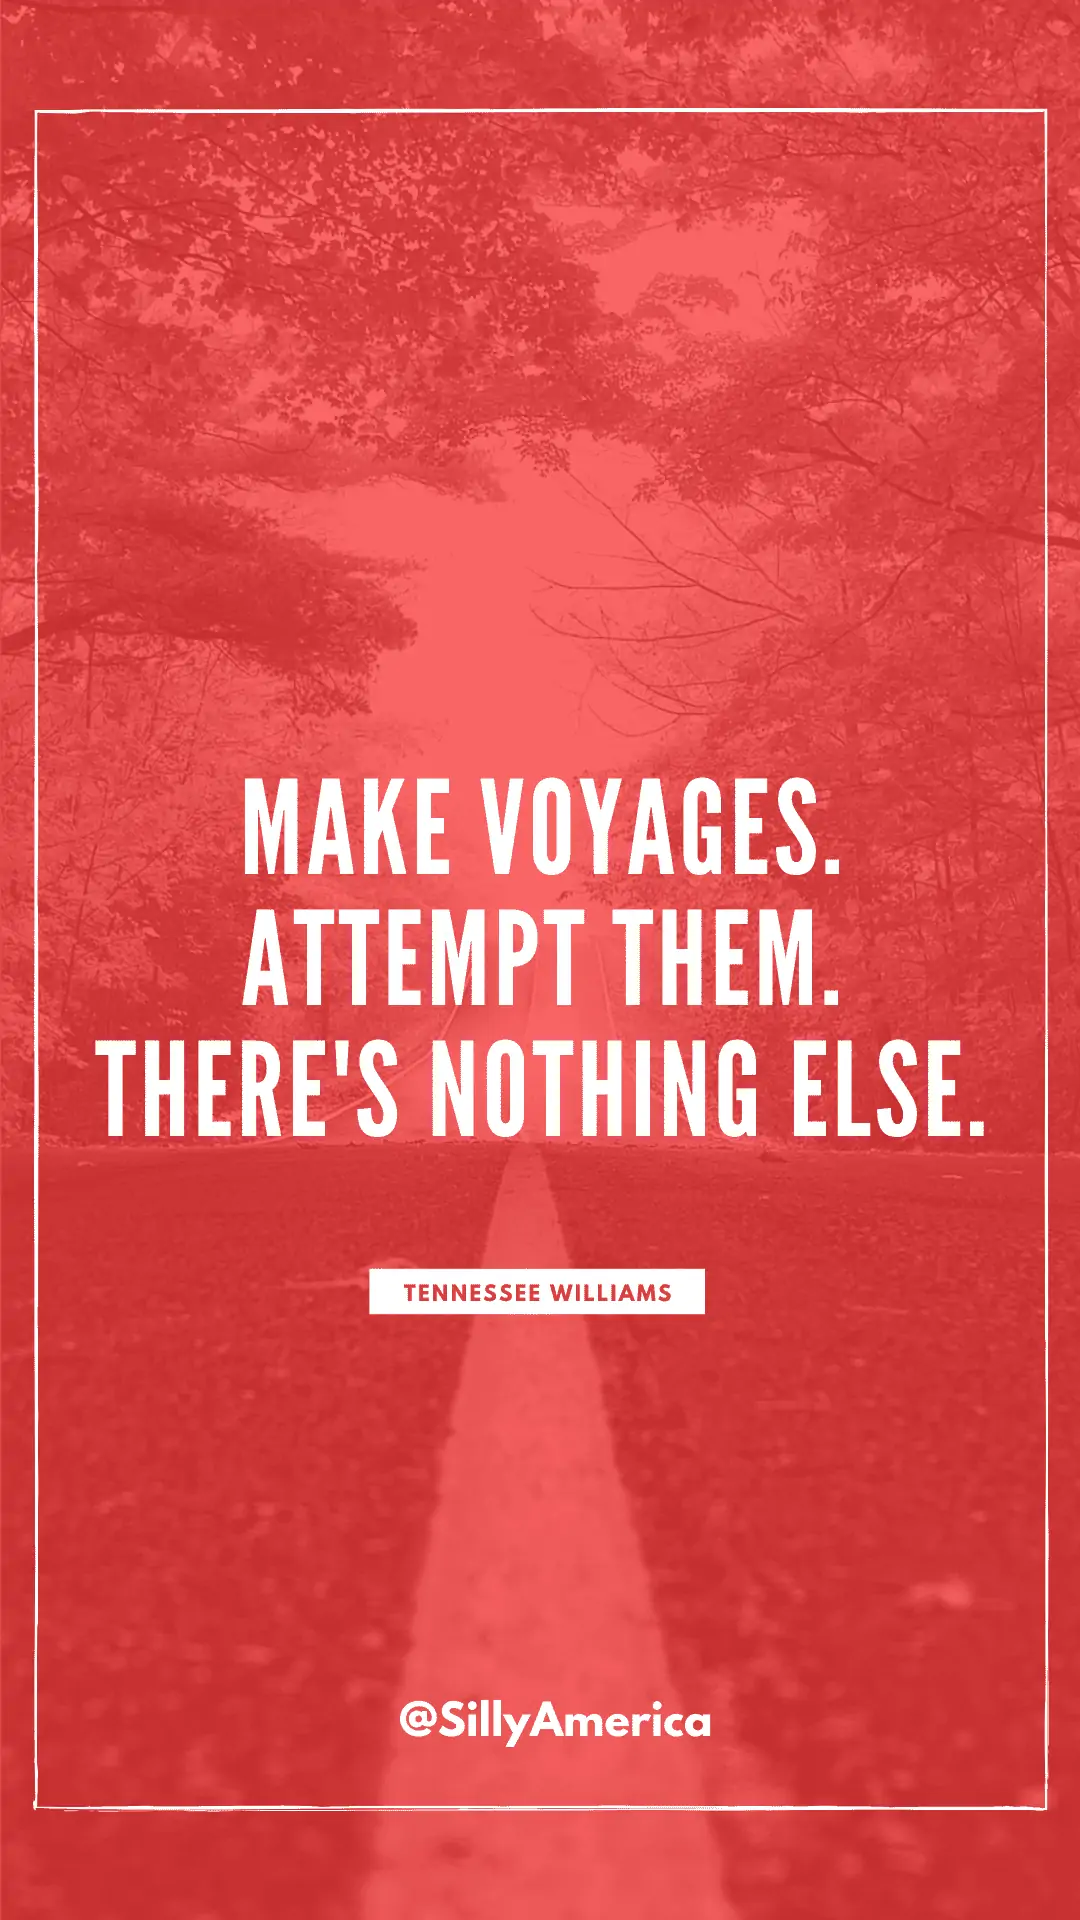 “Make voyages. Attempt them. There’s nothing else.” Tennesse Williams, Camino Real